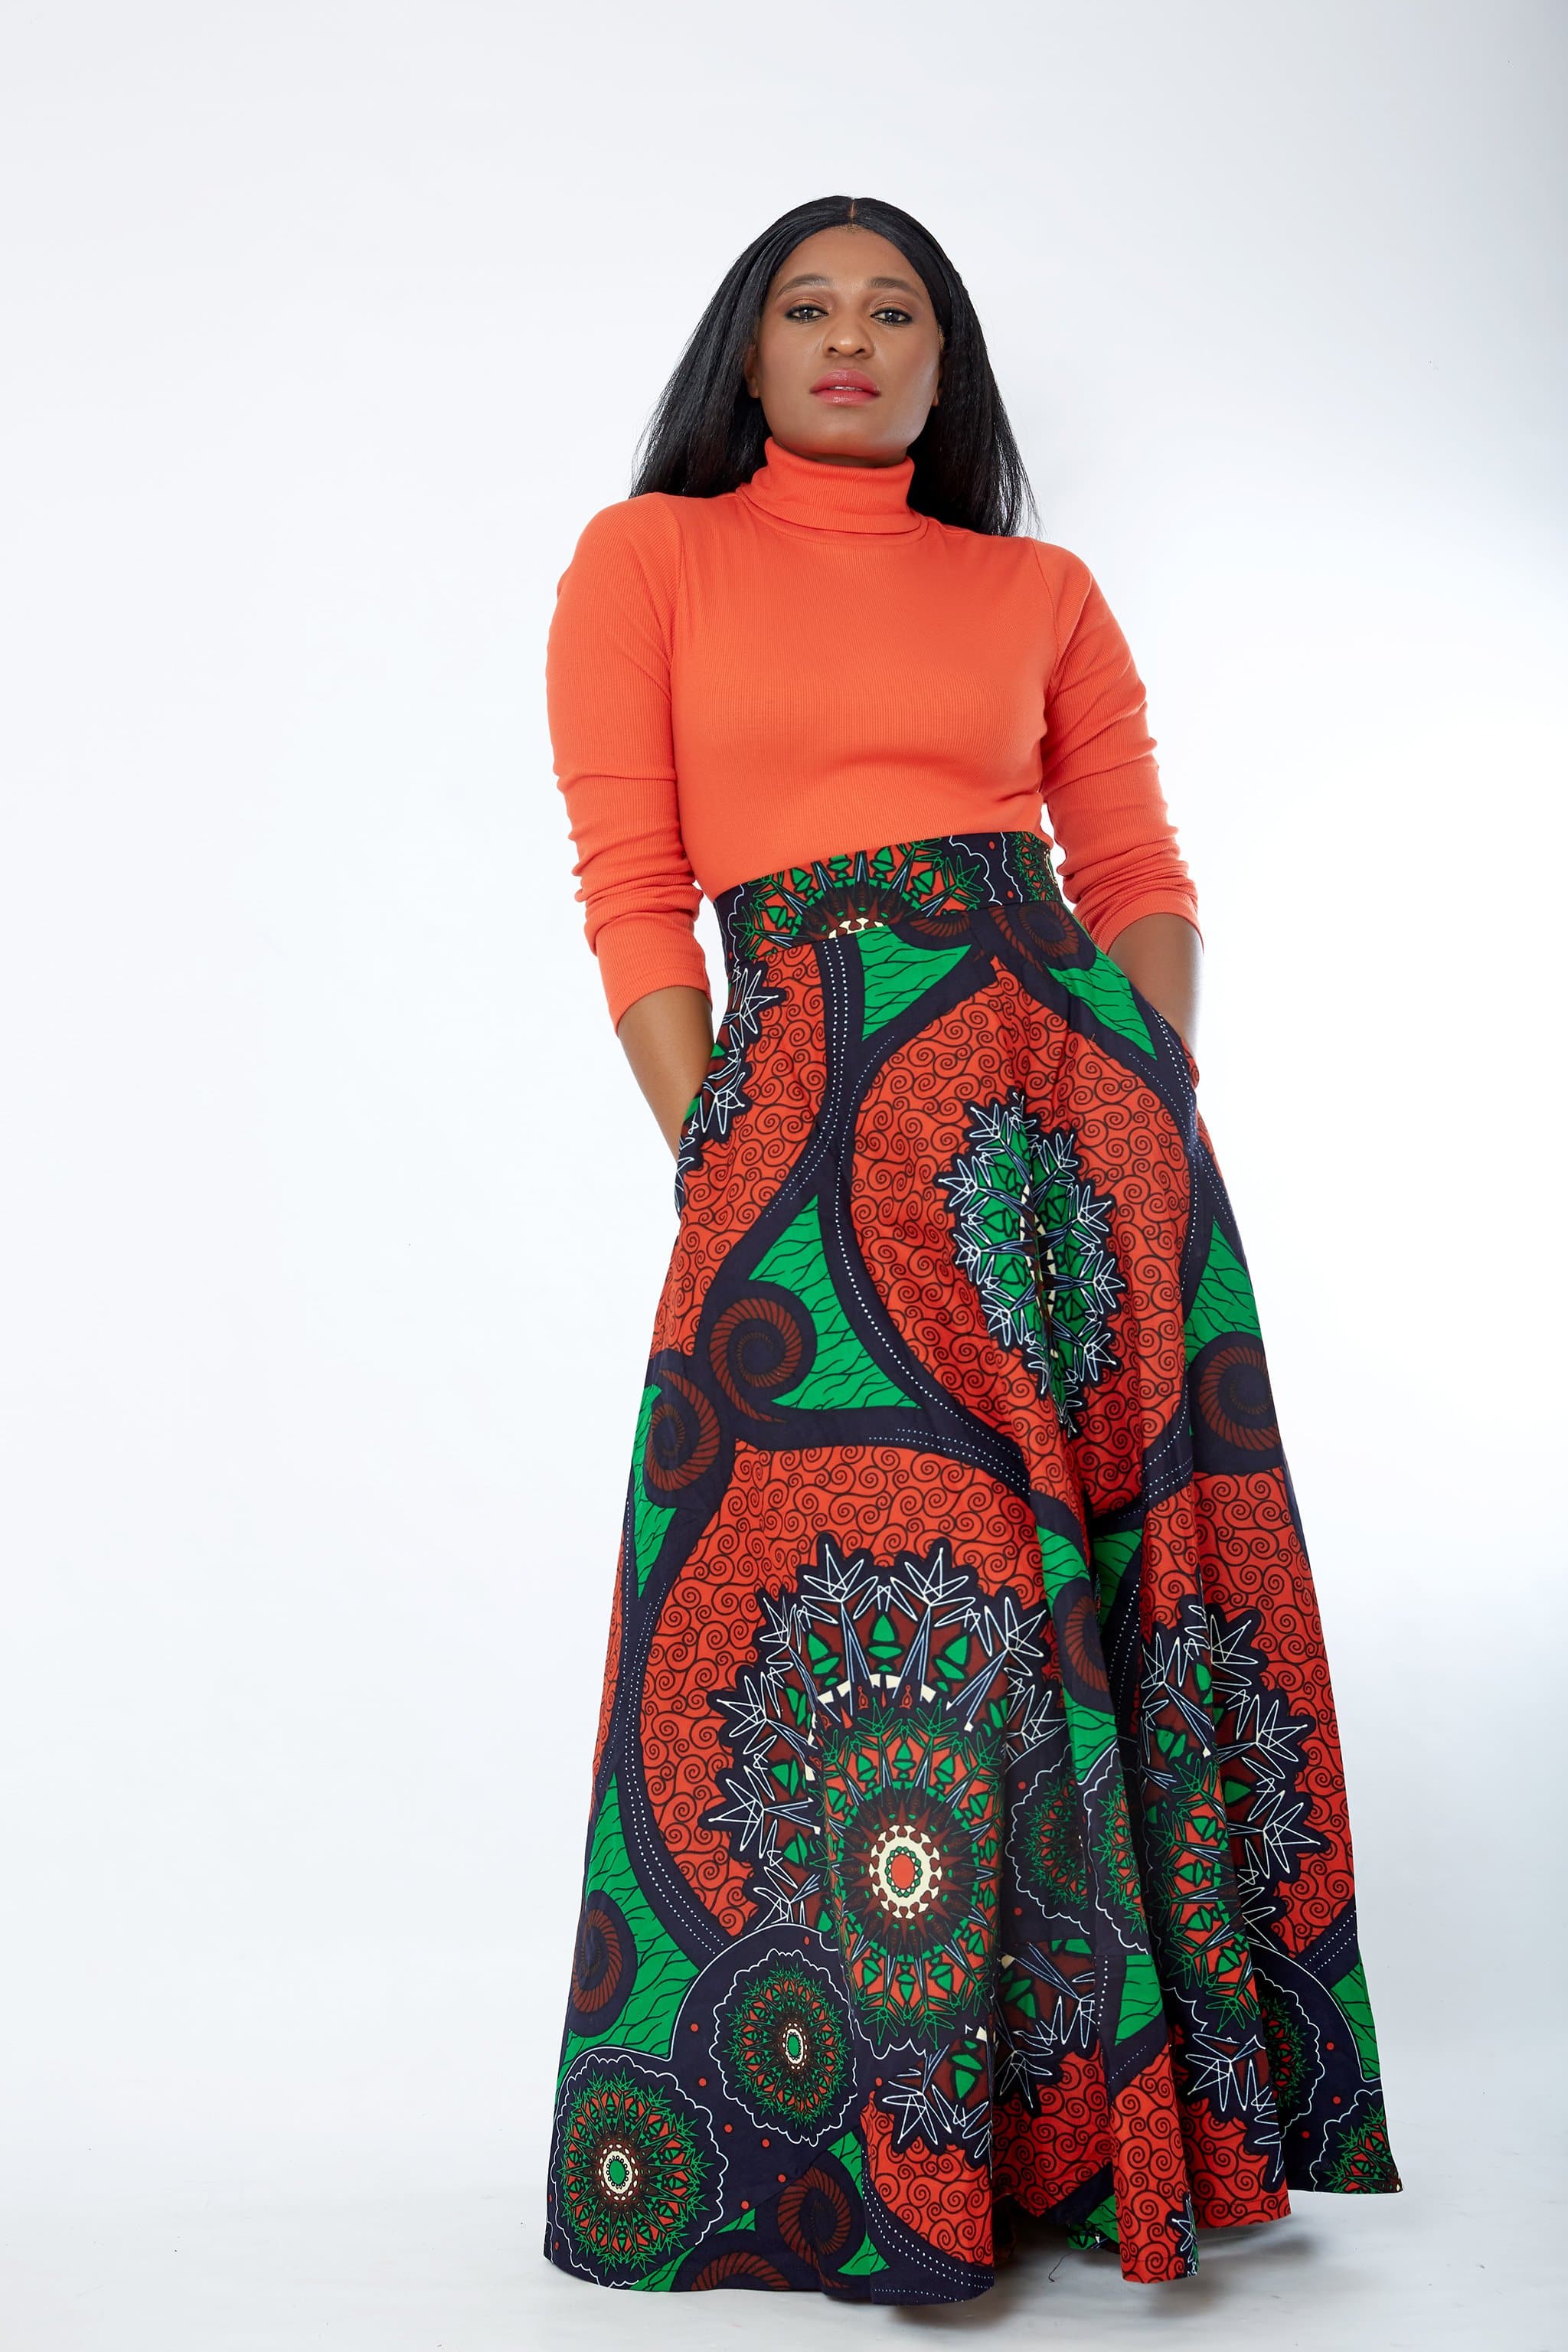 African skirt for plus size women | African print clothing in the UK | Ready to wear African print outfits | African skirt styles | African clothing | African outfit | kitenge skirts | Africa skirts for Women | Ankara Styles skirts for ladies | African maxi skirt | Danshiki skirt | Ghana African skirt | Kente skirt | African flare skirt | African print skirt | African Clothing Online Shop | Short African skirt | Mini African skirt UK | African skirt UK